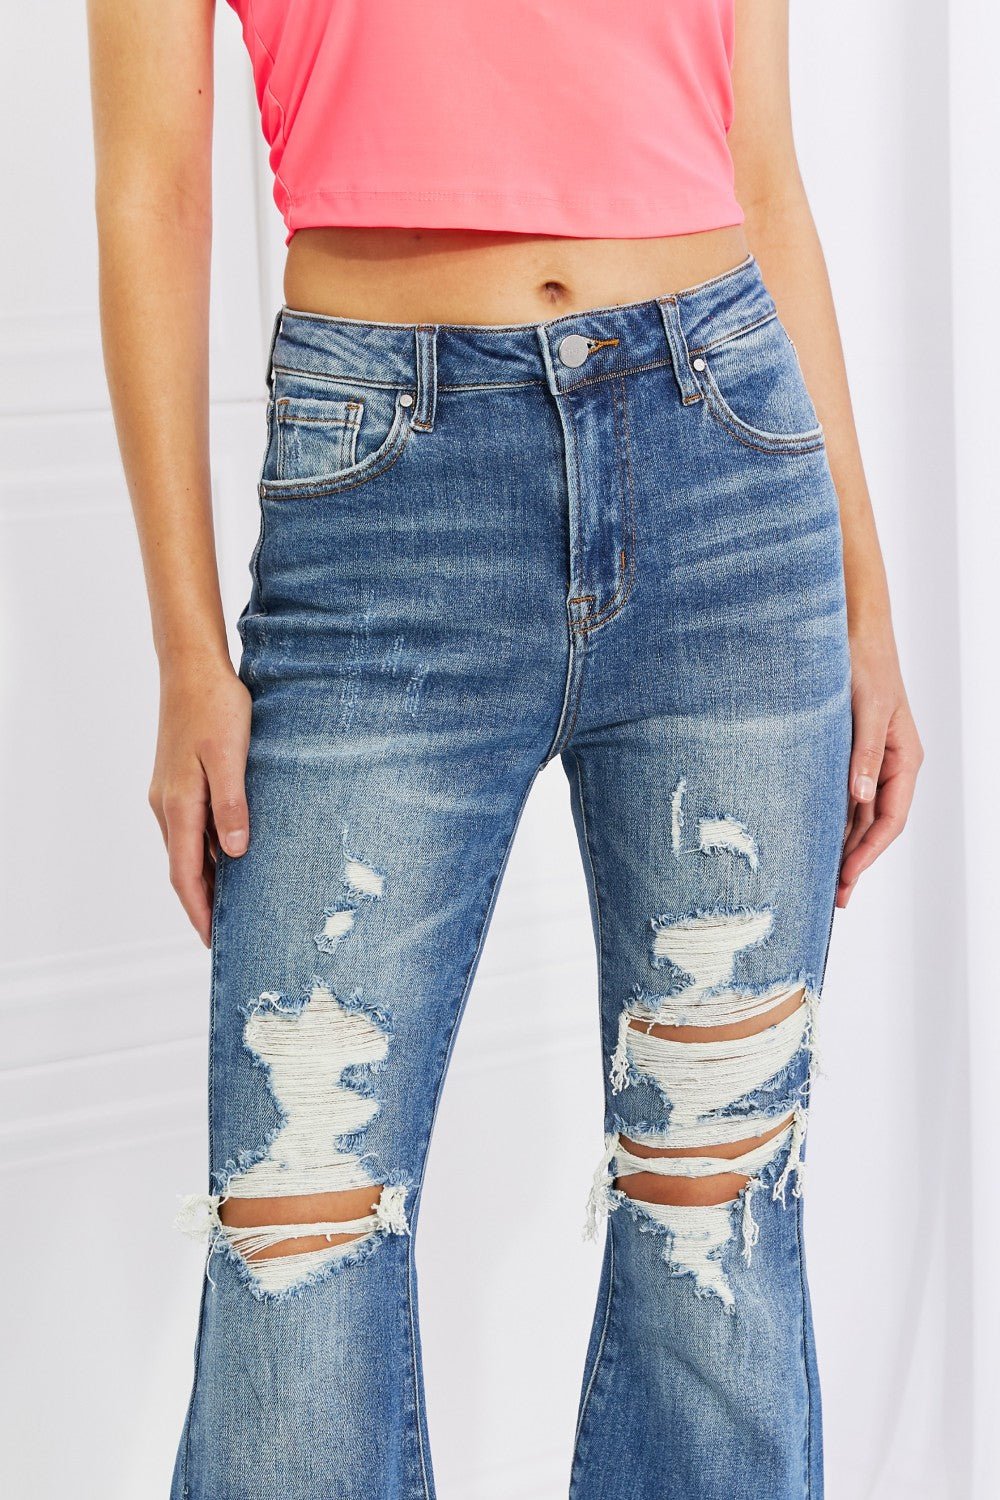 Hazel High Rise Distressed Flare Jeans - Mythical Kitty Boutique